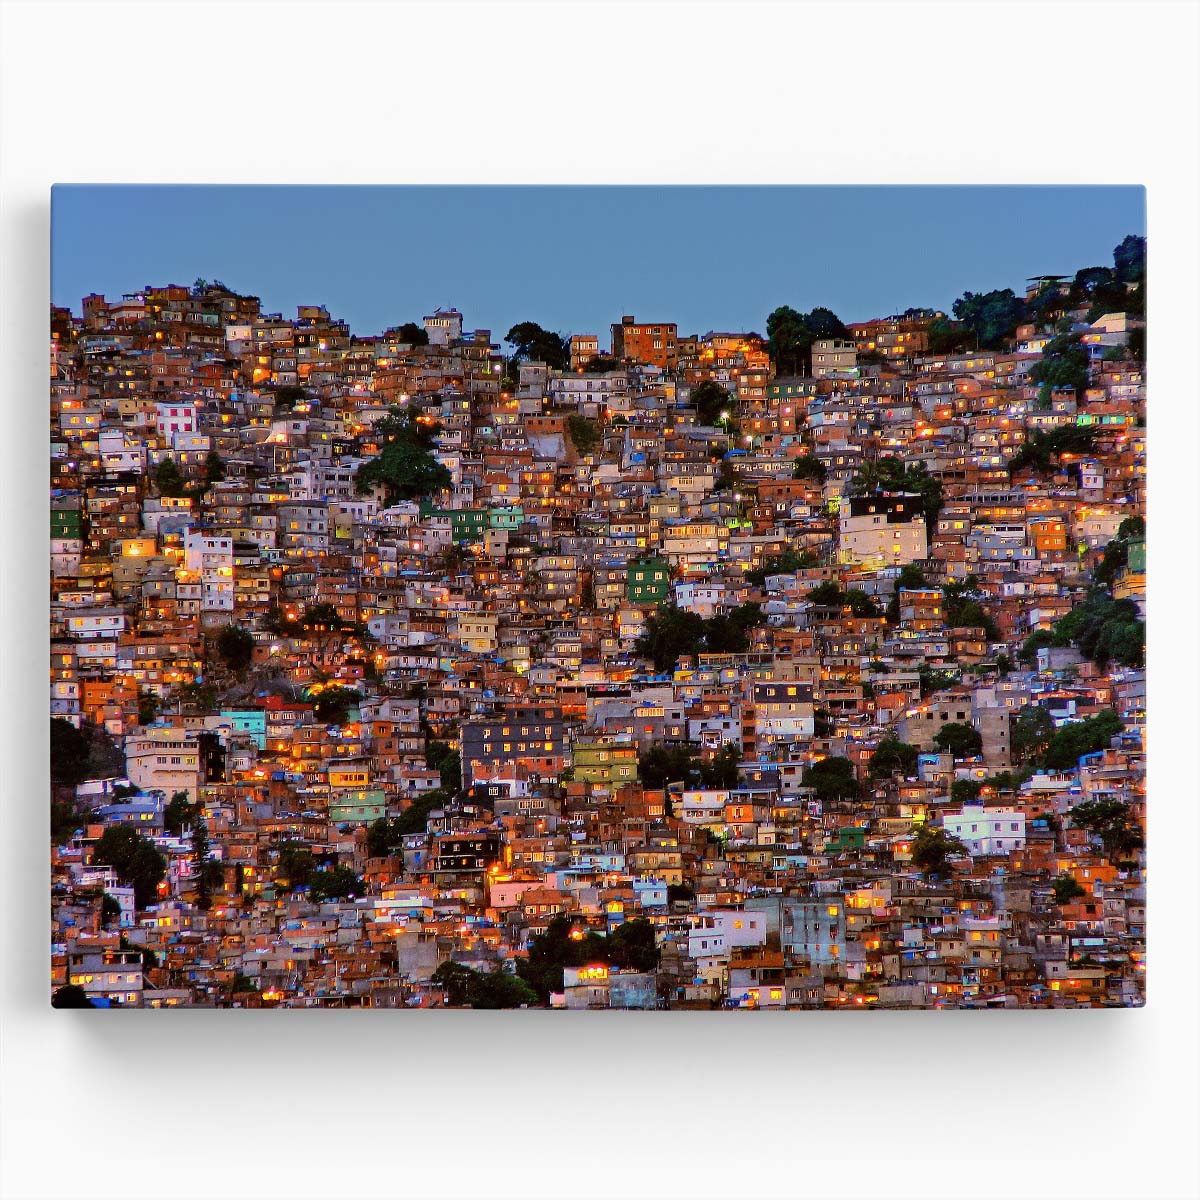 Colorful Rocinha Favela Rio Night Skyline Wall Art by Luxuriance Designs. Made in USA.